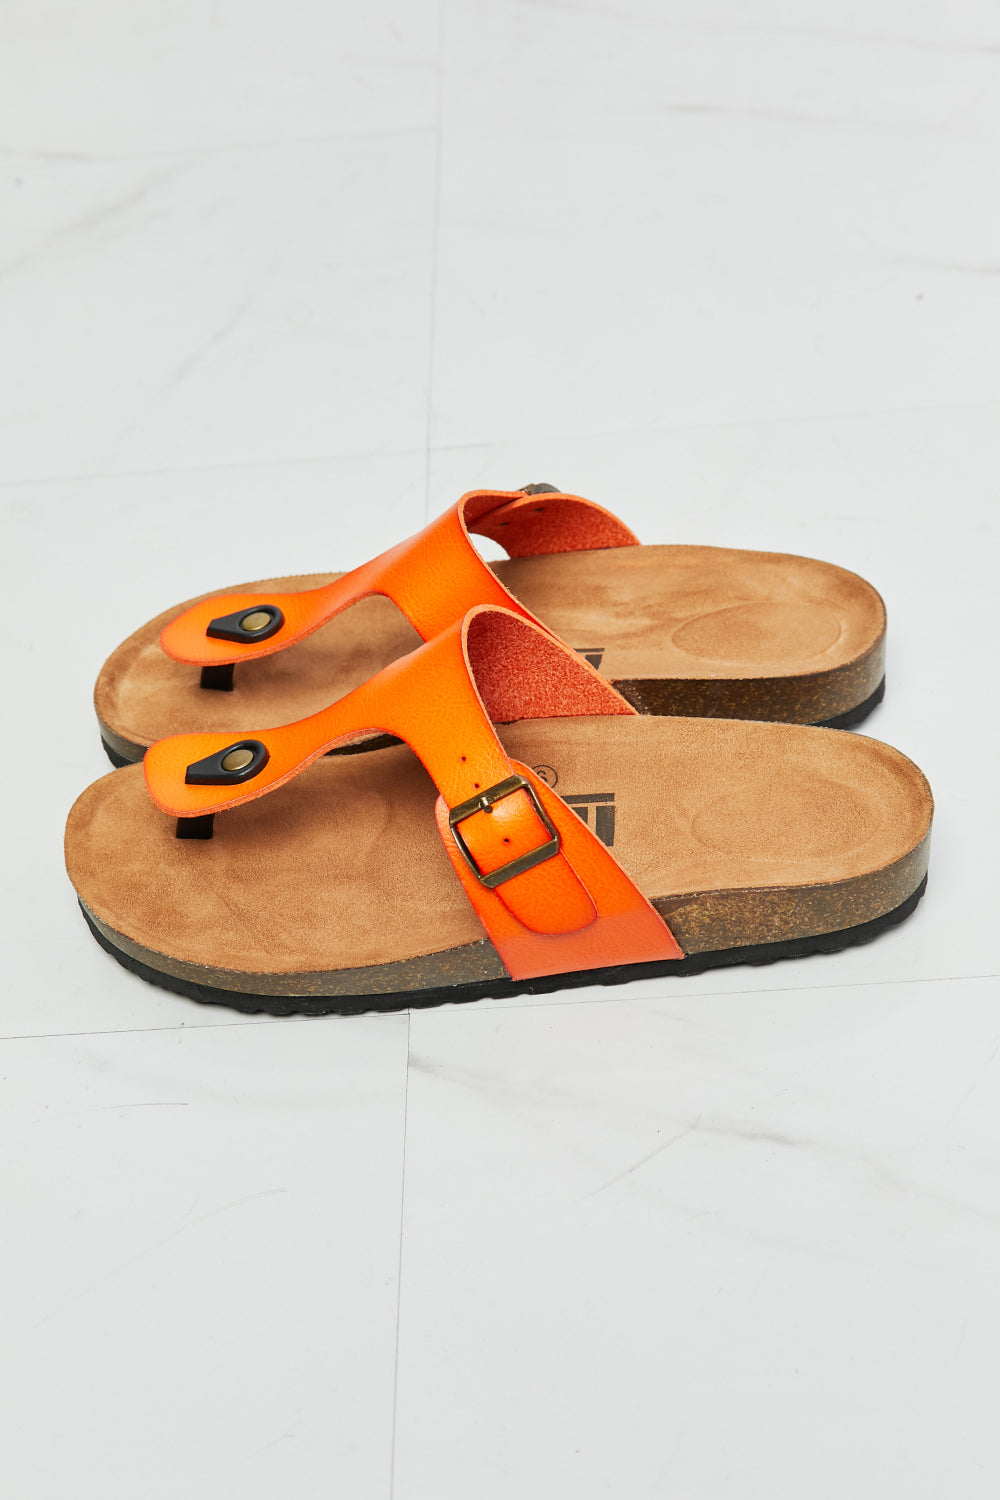 MMShoes Drift Away T-Strap Flip-Flop in Orange Print on any thing USA/STOD clothes